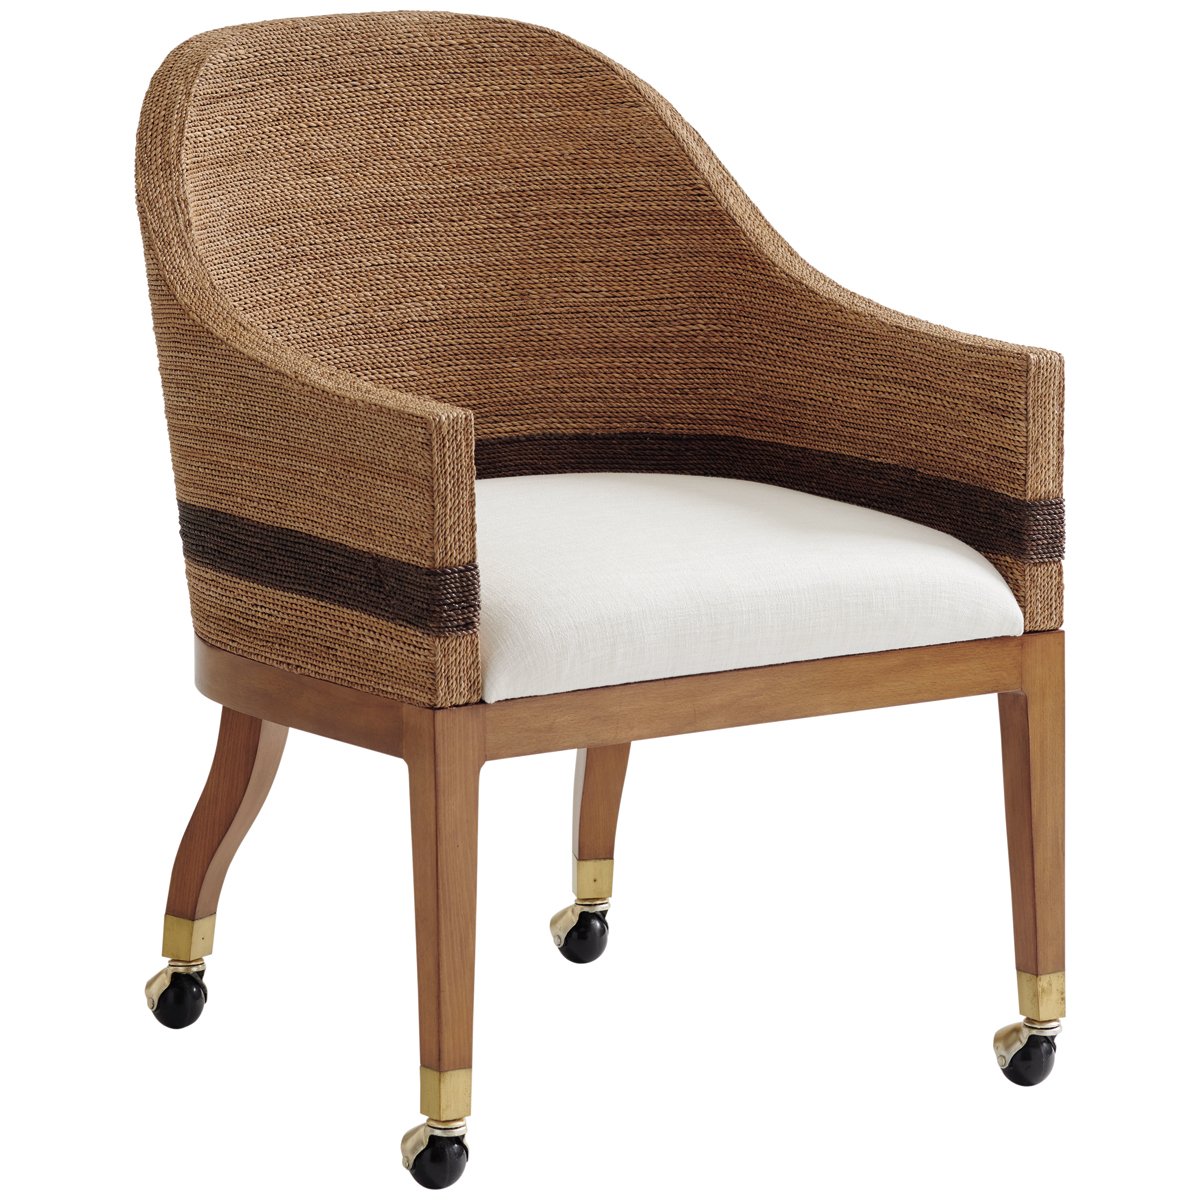 Tommy Bahama Palm Desert Dorian Woven Arm Chair with Casters